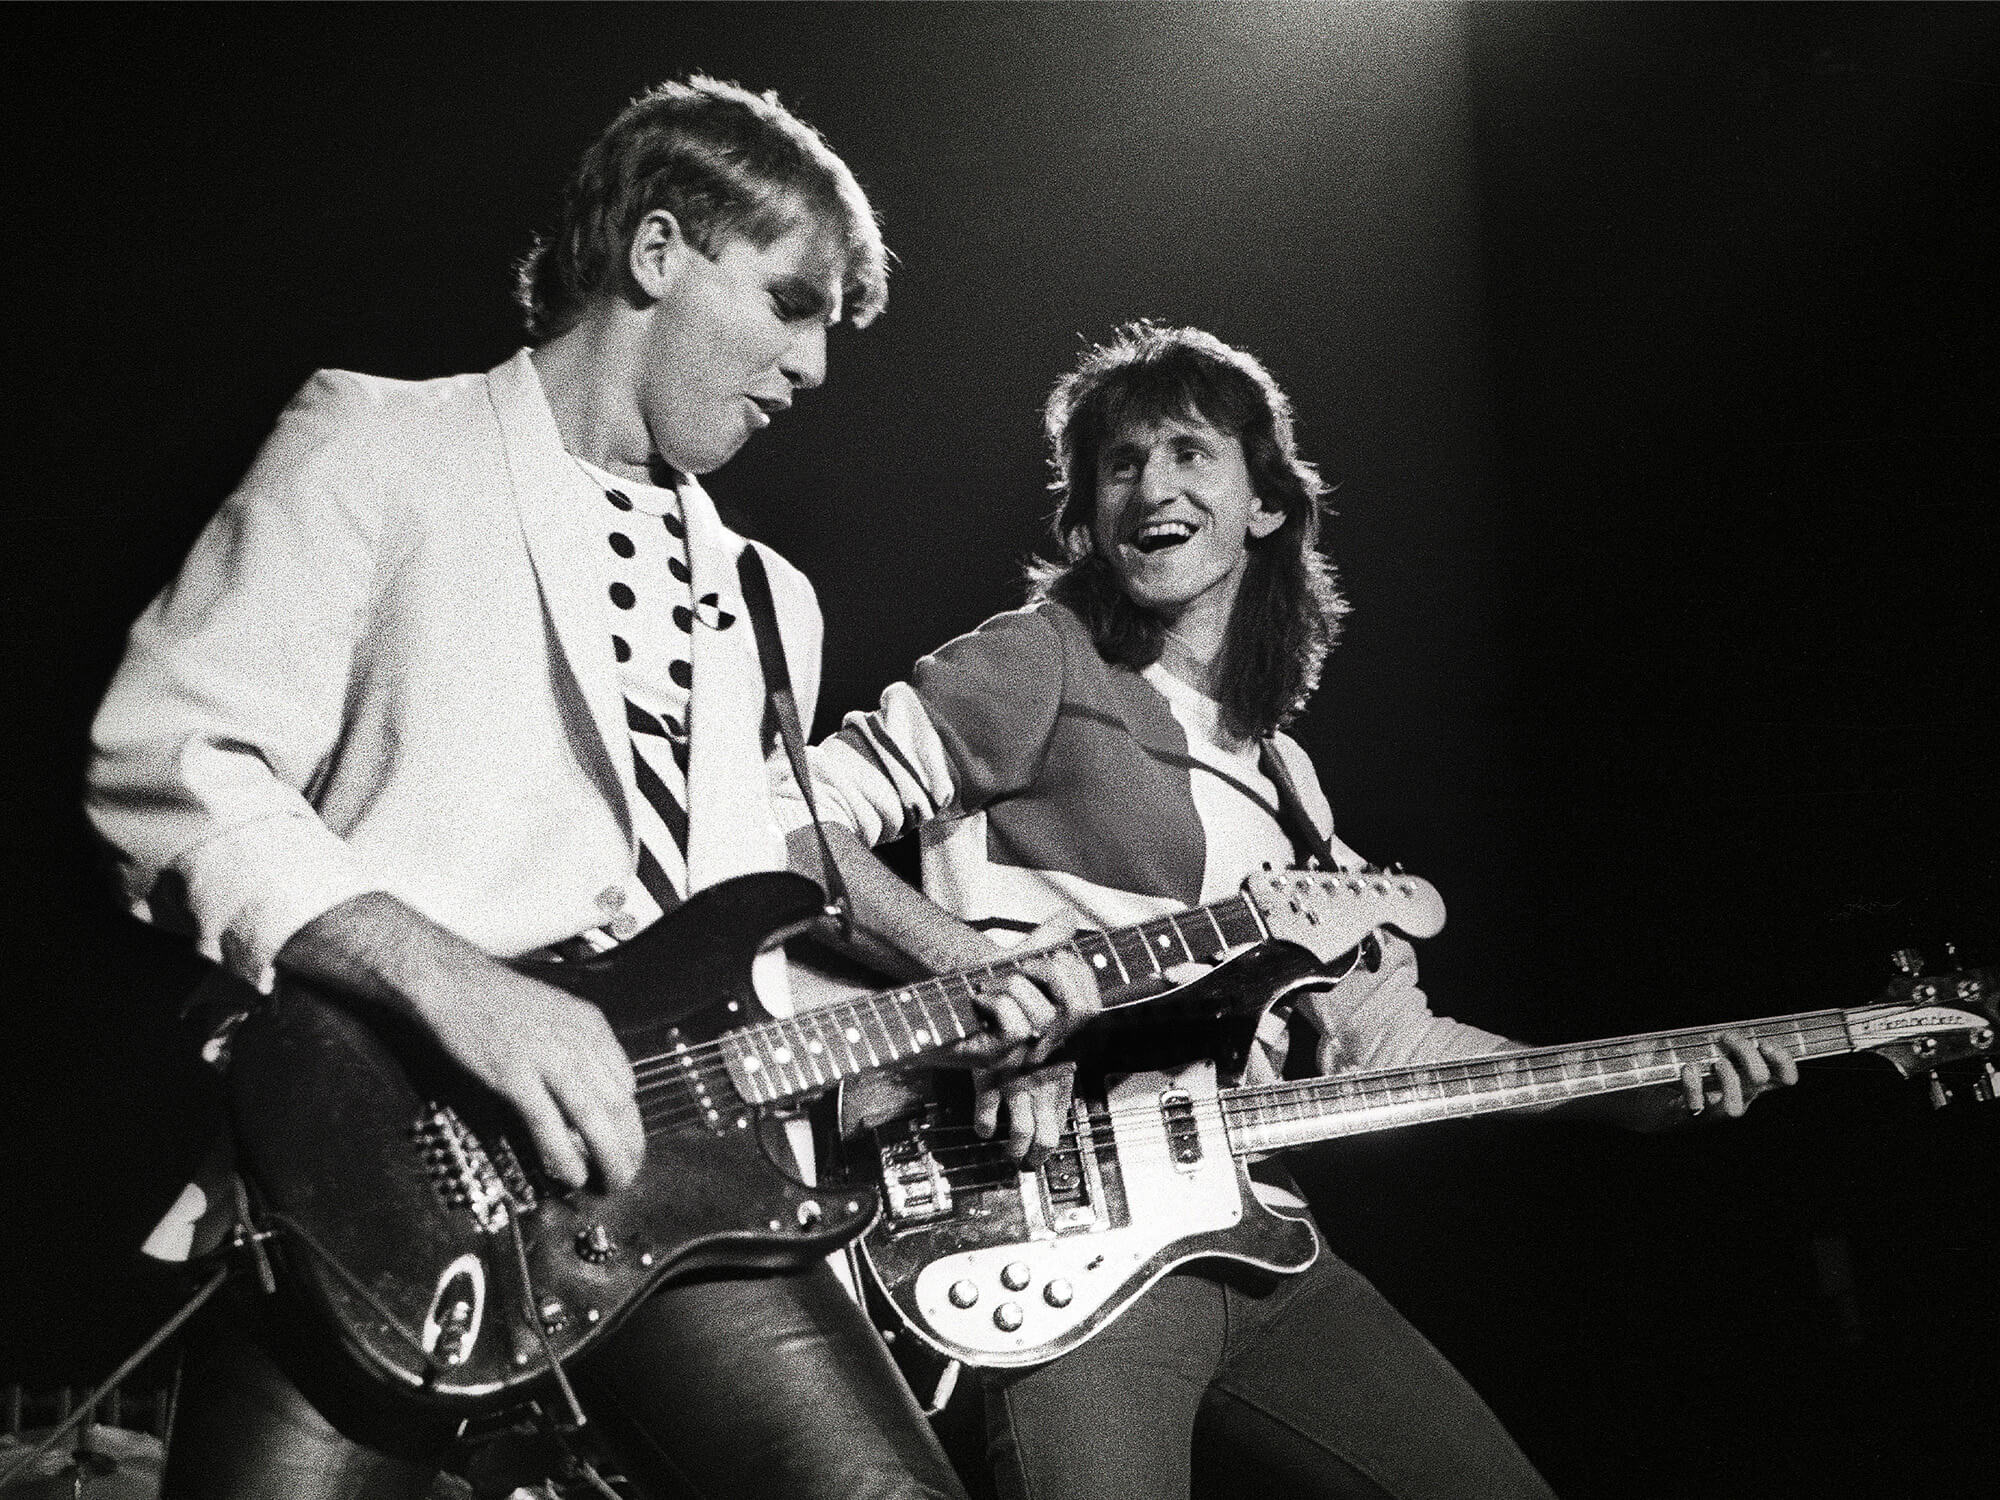 A black and white photo of Alex Lifeson and Geddy Lee on stage in 1983. They both have guitars in hand. Geddy is smiling at Alex, who is looking down at his guitar with a passionate expression. Photo by Rob Verhorst/Getty Images